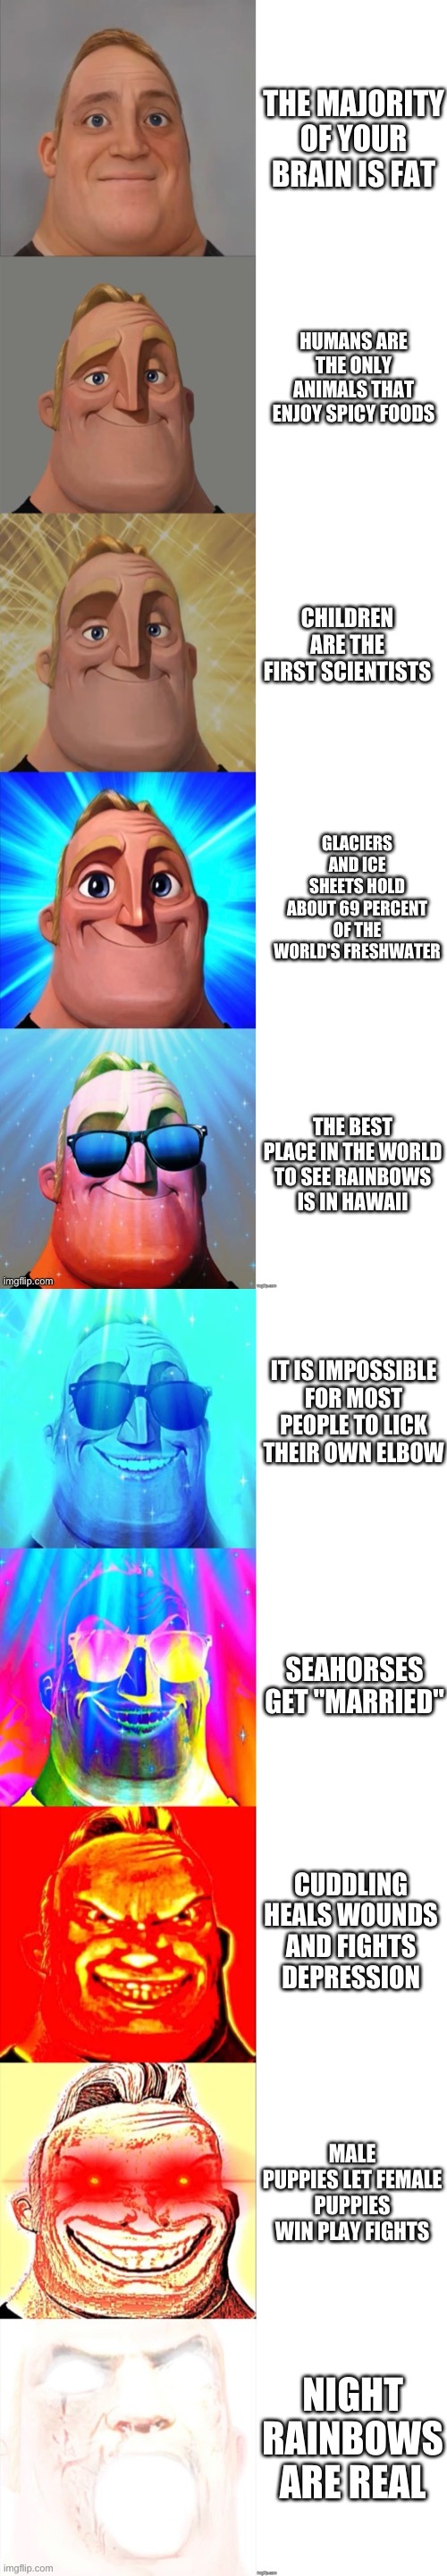 Mr Incredible Becoming Canny | THE MAJORITY OF YOUR BRAIN IS FAT; HUMANS ARE THE ONLY ANIMALS THAT ENJOY SPICY FOODS; CHILDREN ARE THE FIRST SCIENTISTS; GLACIERS AND ICE SHEETS HOLD ABOUT 69 PERCENT OF THE WORLD'S FRESHWATER; THE BEST PLACE IN THE WORLD TO SEE RAINBOWS IS IN HAWAII; IT IS IMPOSSIBLE FOR MOST PEOPLE TO LICK THEIR OWN ELBOW; SEAHORSES GET "MARRIED"; CUDDLING HEALS WOUNDS AND FIGHTS DEPRESSION; MALE PUPPIES LET FEMALE PUPPIES WIN PLAY FIGHTS; NIGHT RAINBOWS ARE REAL | image tagged in mr incredible becoming canny | made w/ Imgflip meme maker